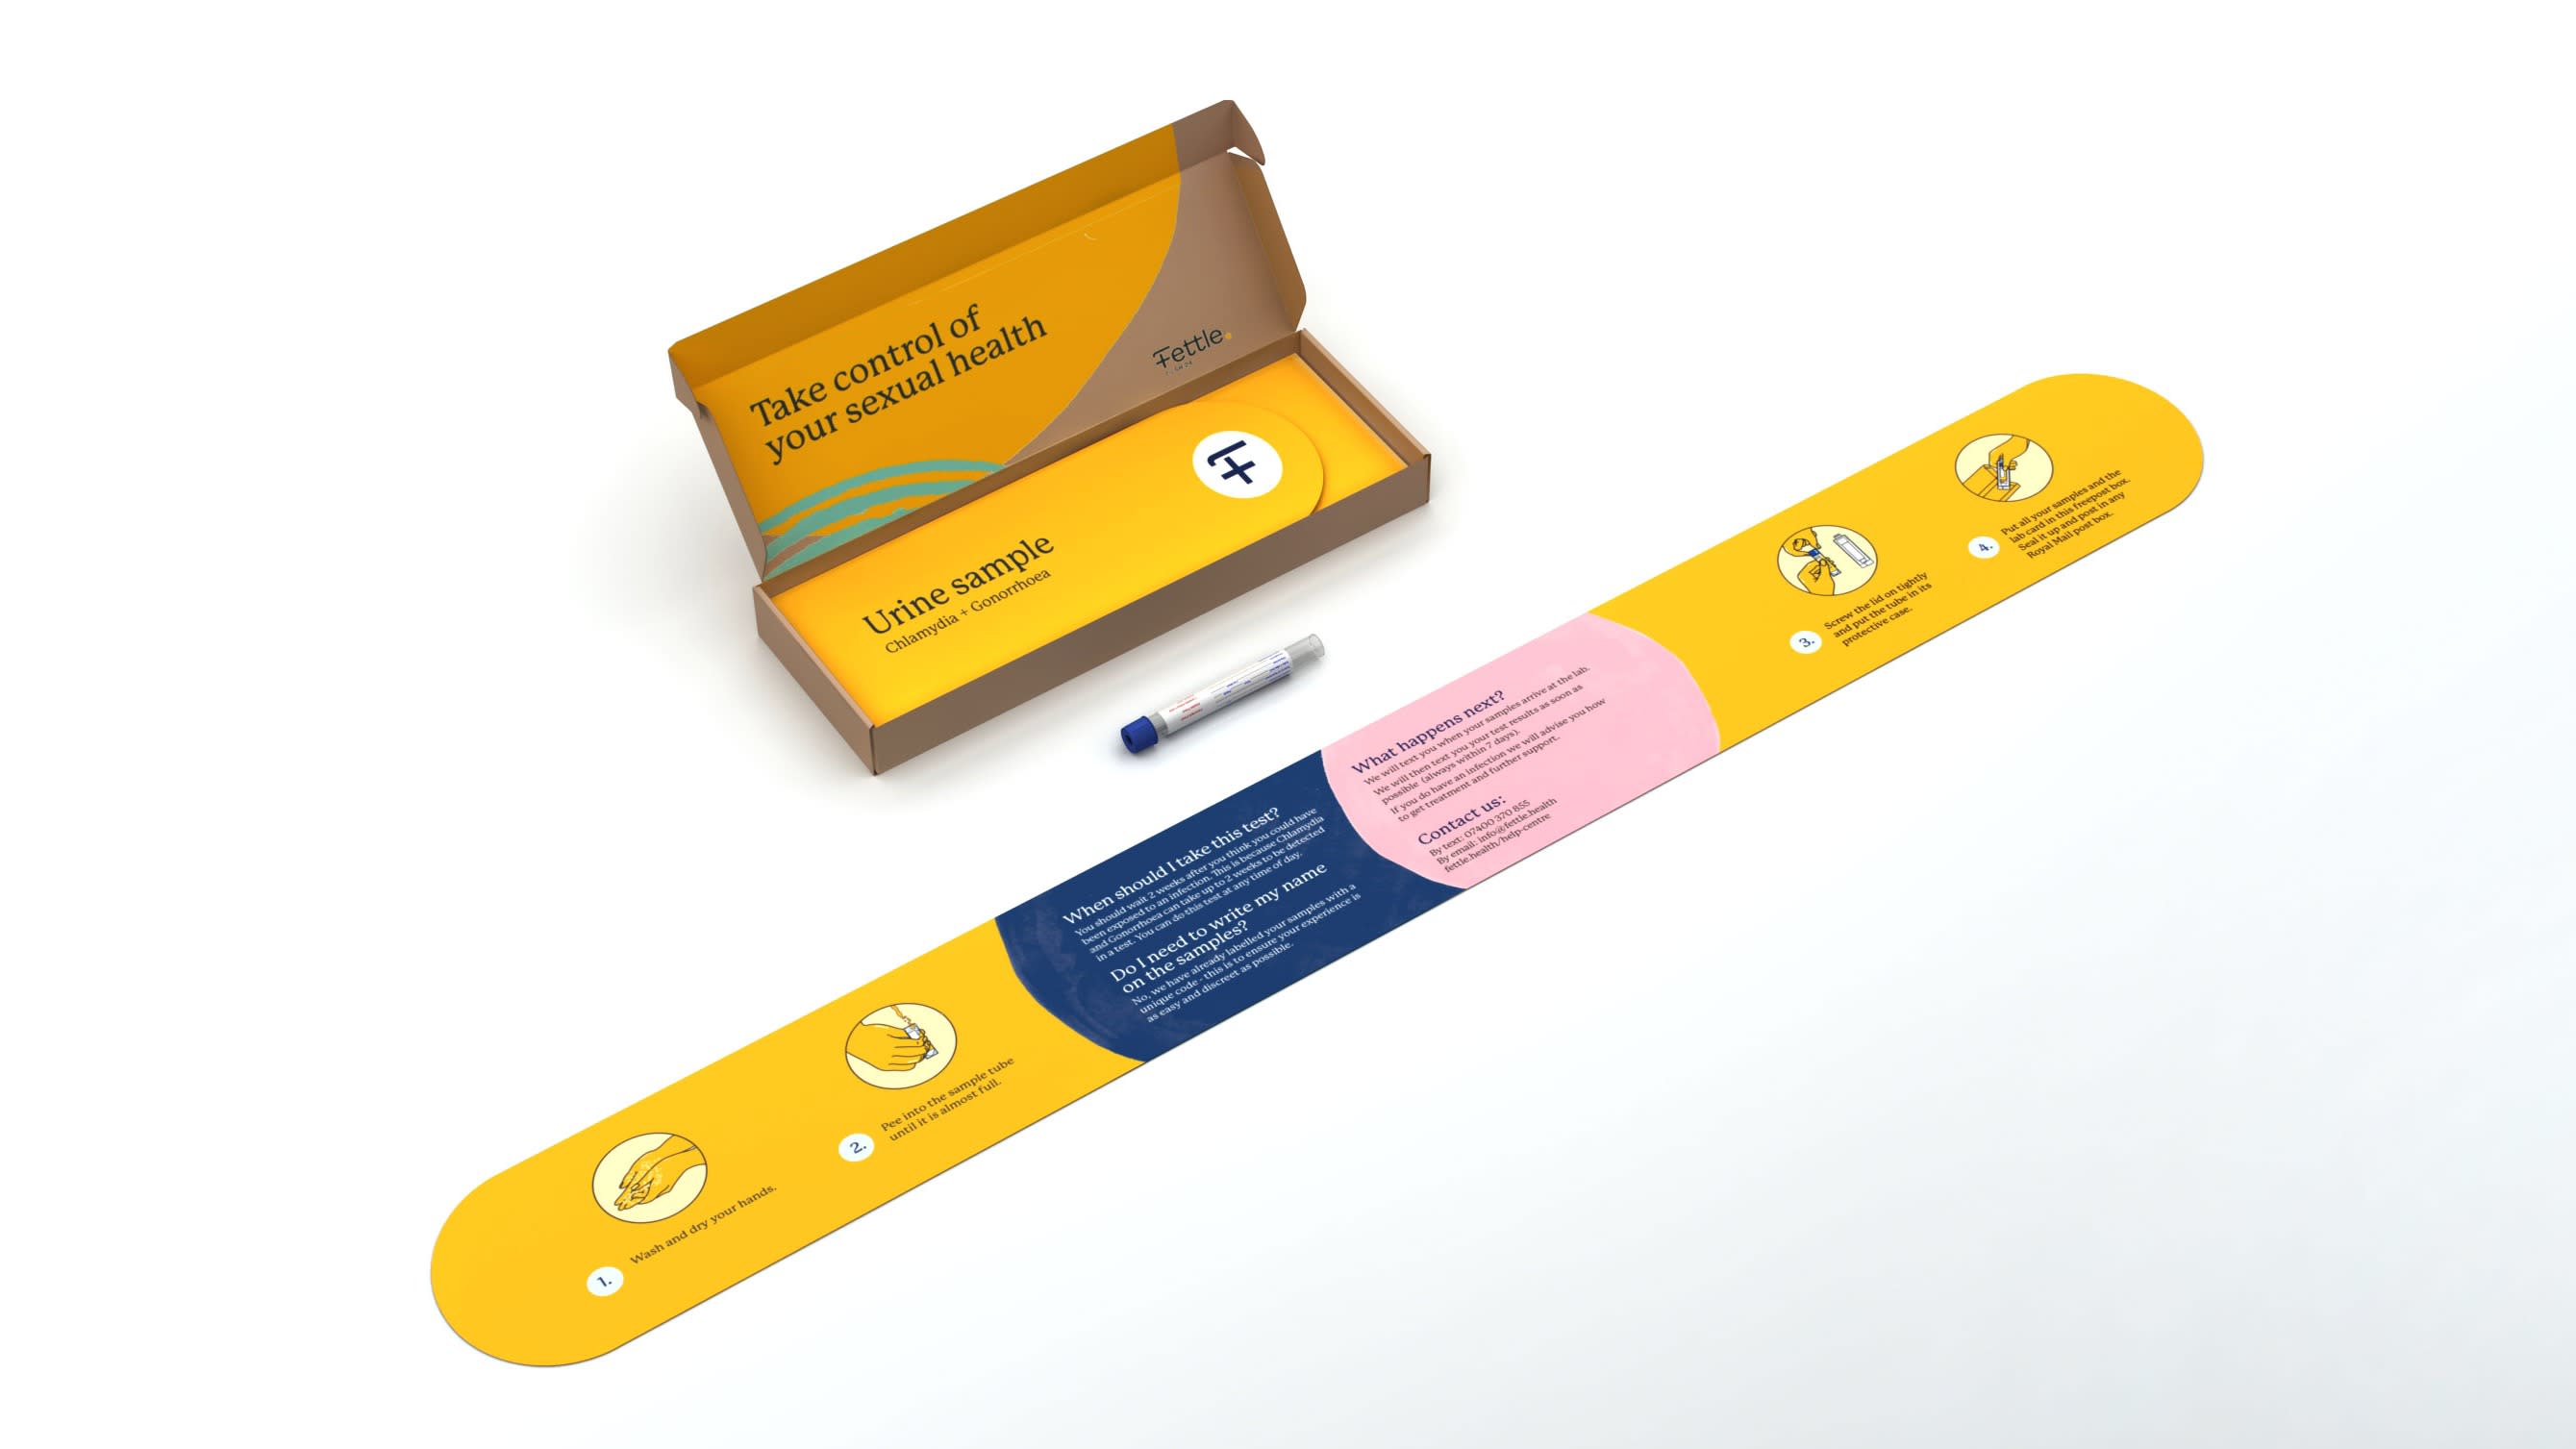 Image of Fettle urine test kit with packaging and instructions